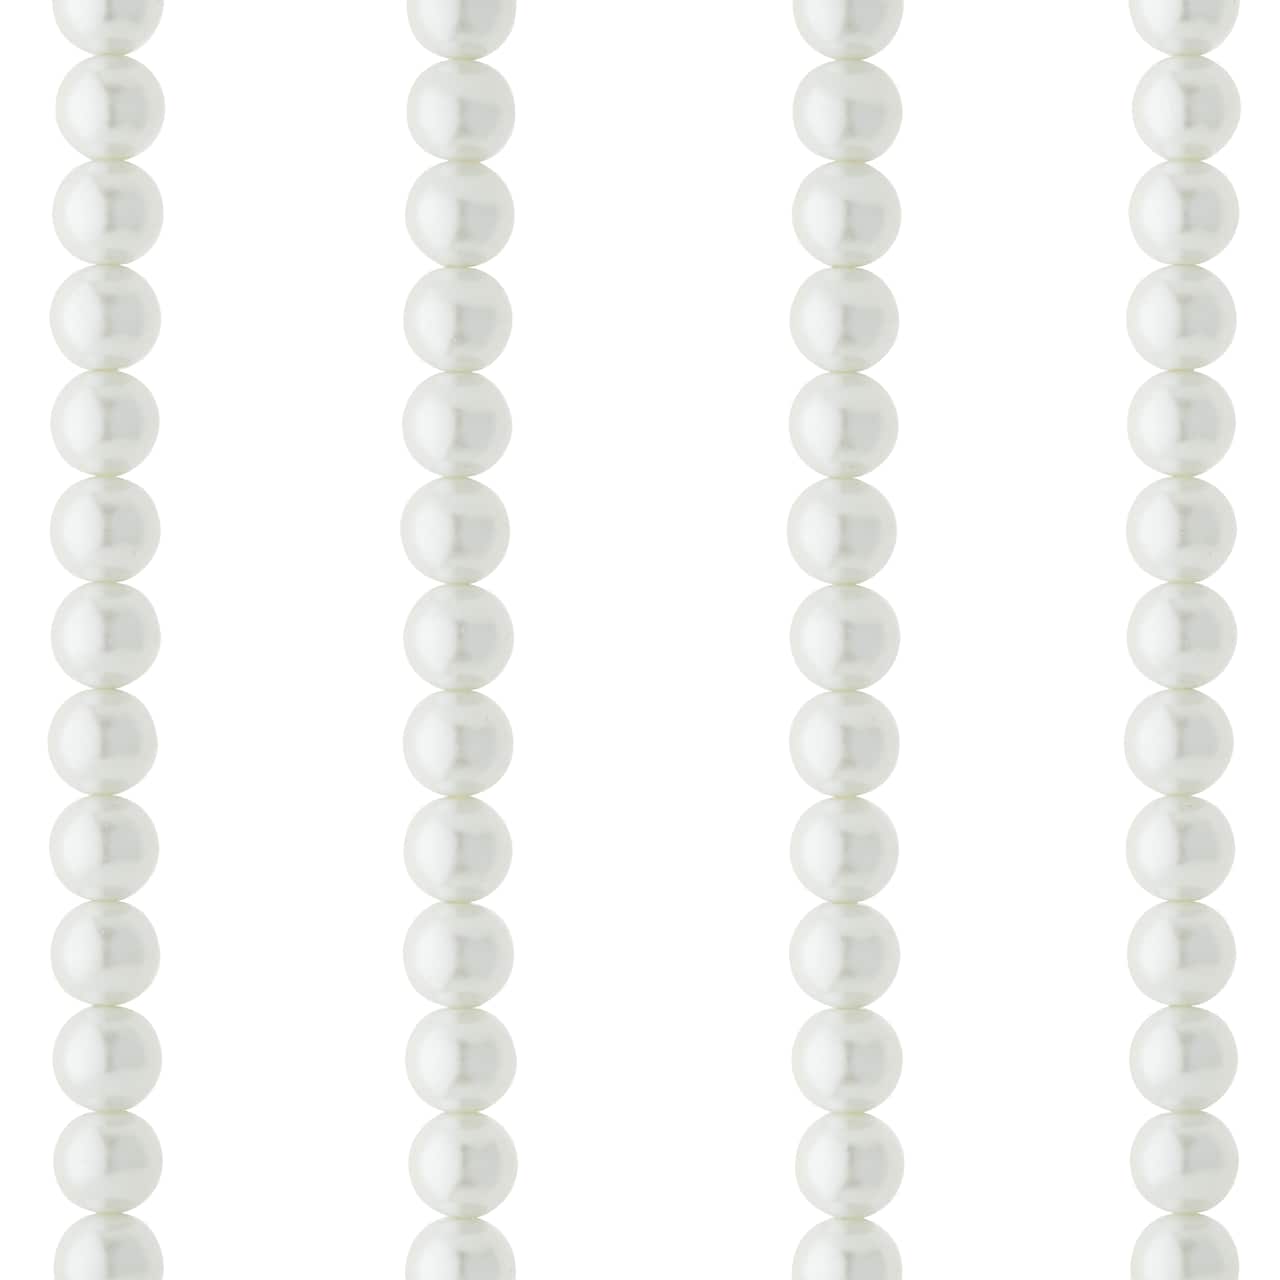 9 Packs: 72 ct. (648 total) Glass White Pearl Round Beads, 10mm by Bead Landing&#x2122;